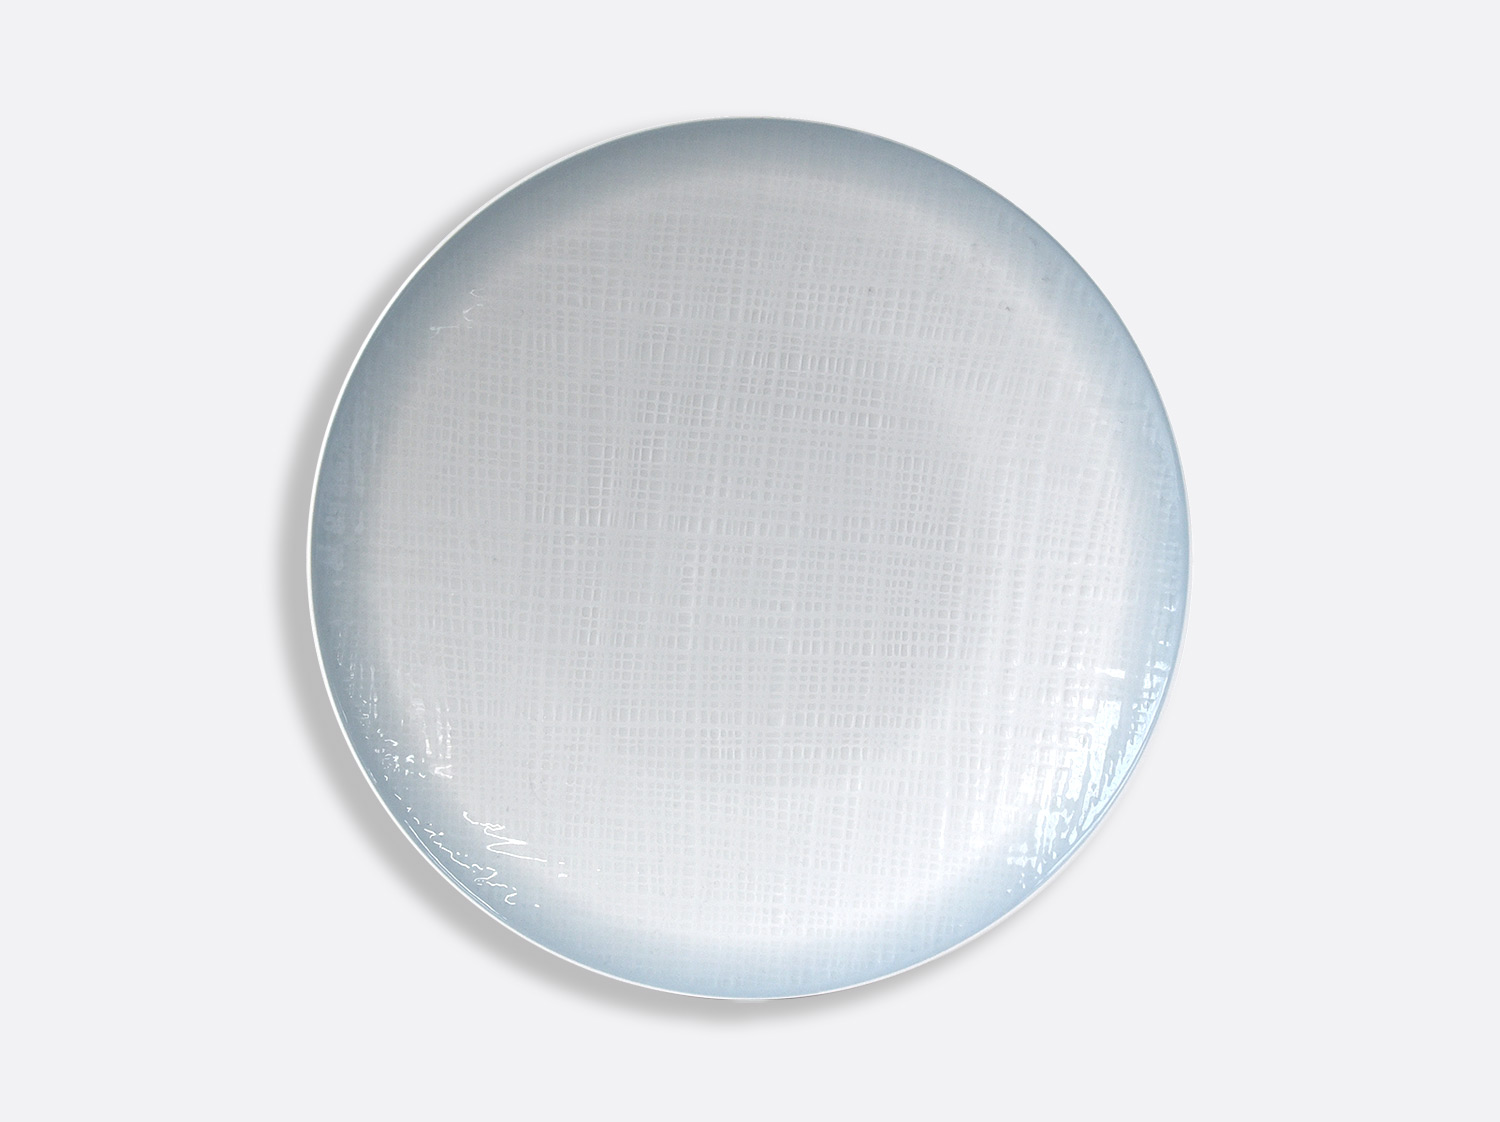 China Coupe plate 10.5" of the collection Eclipse | Bernardaud